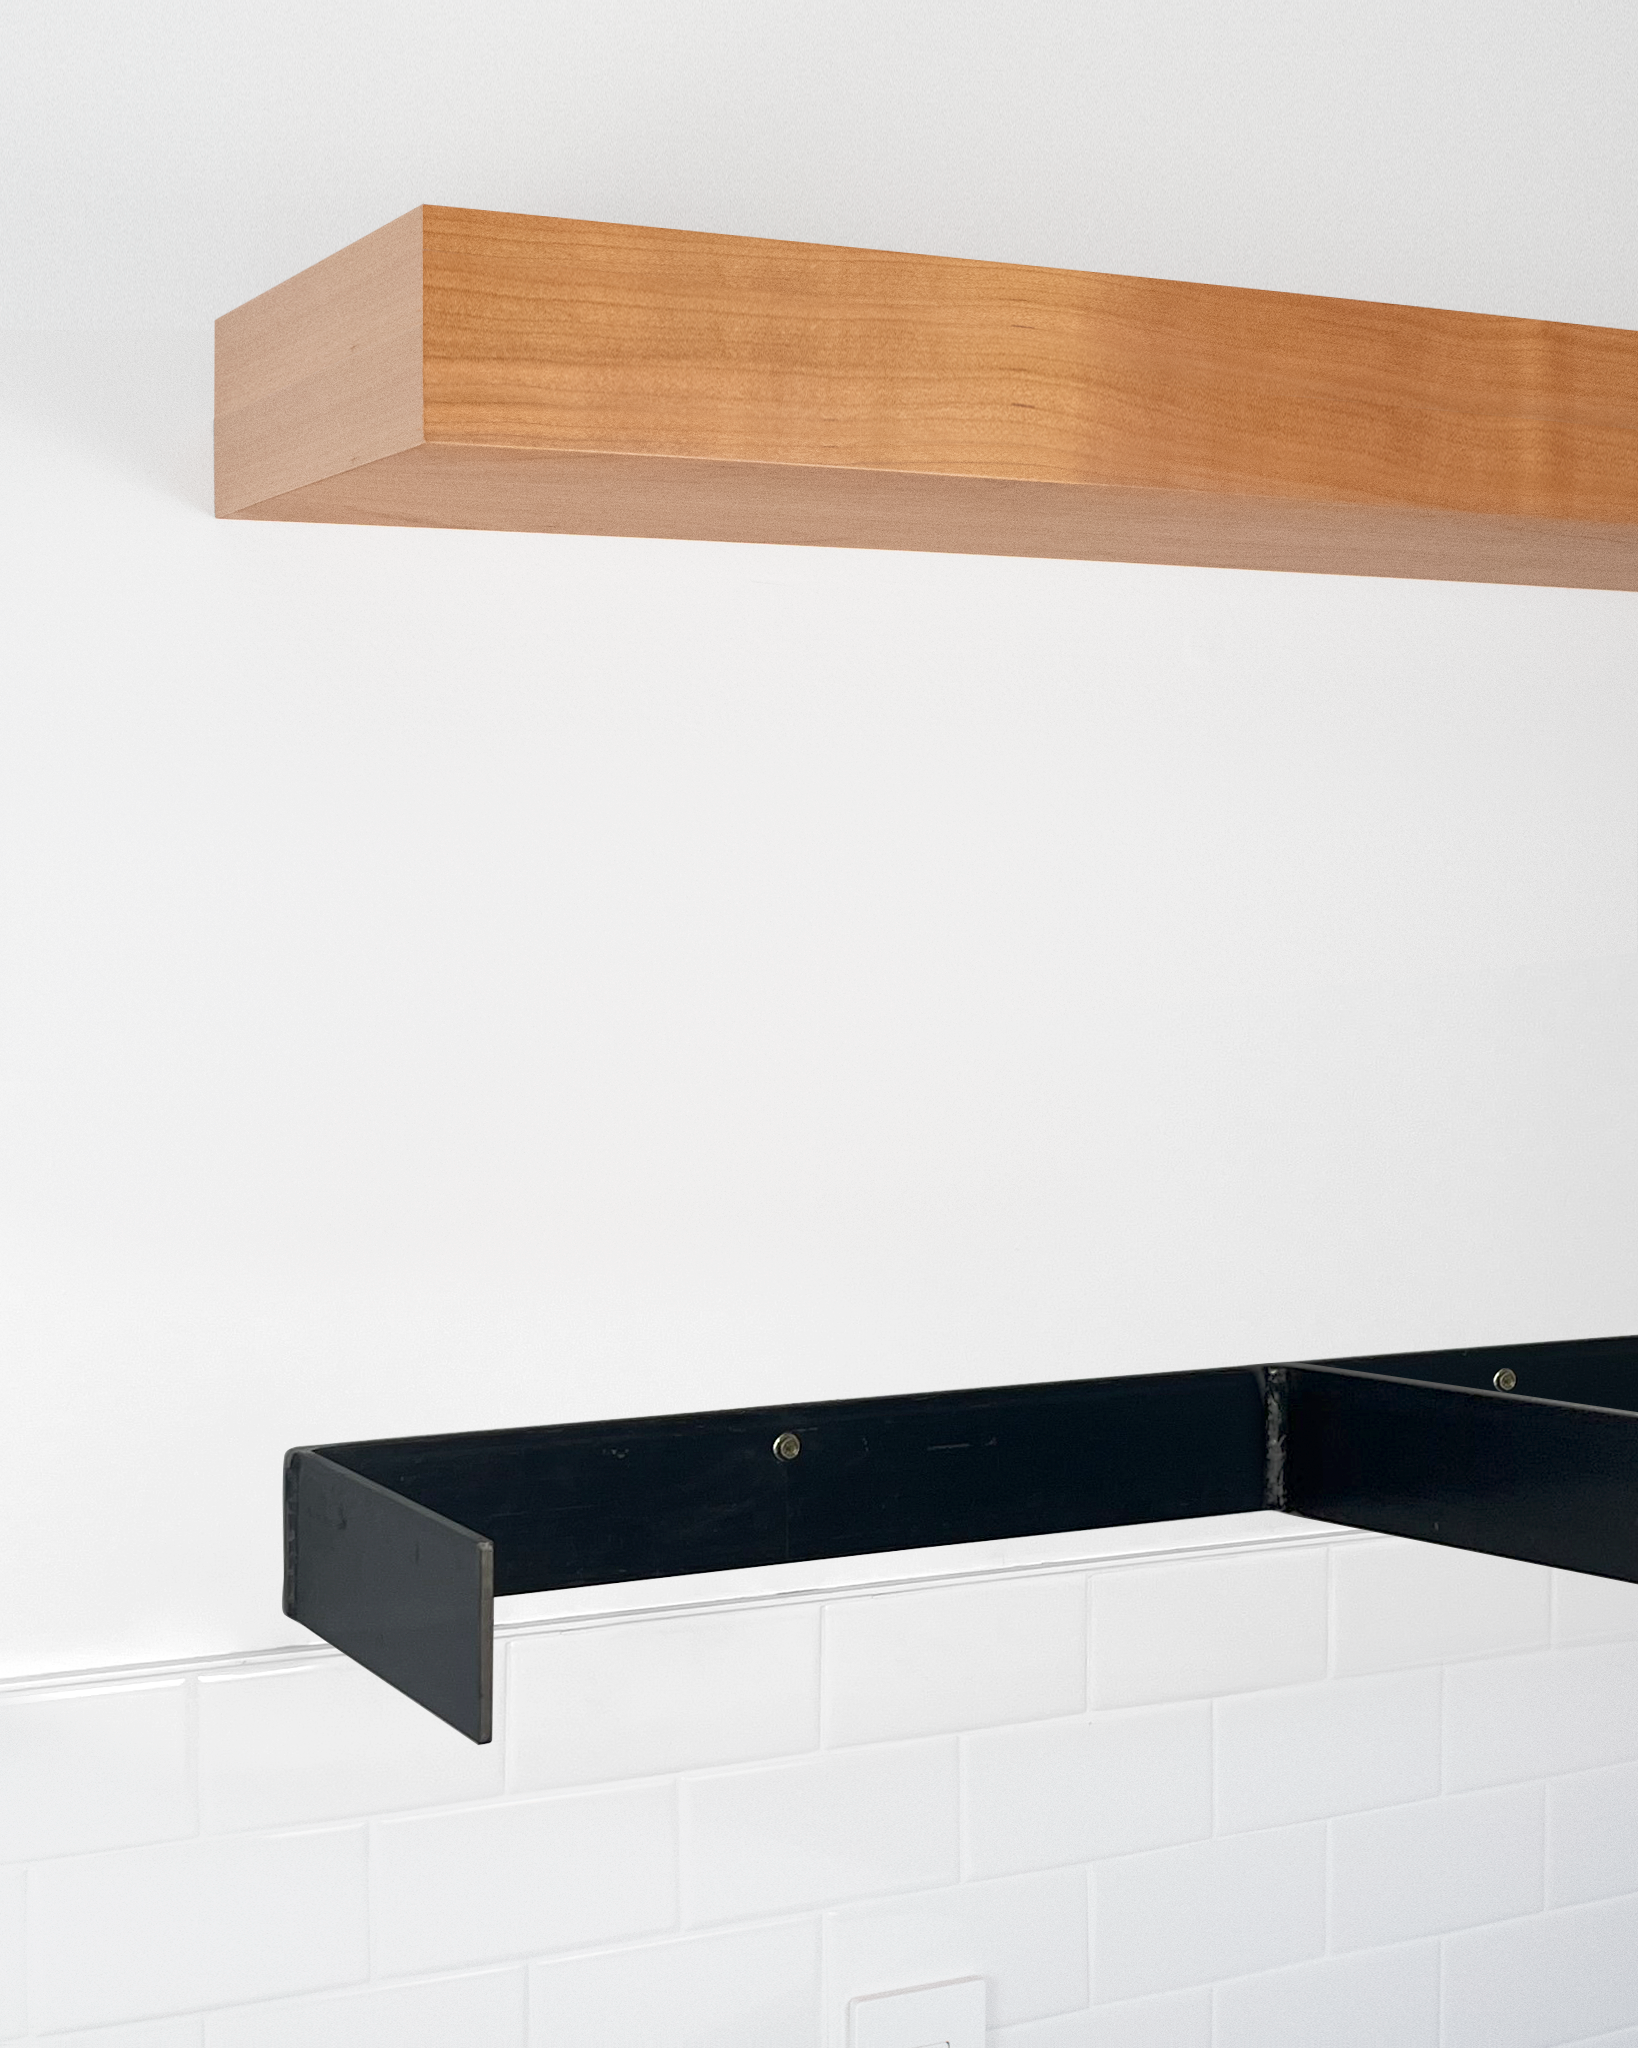 Cherry Floating Shelves 2-4" thick